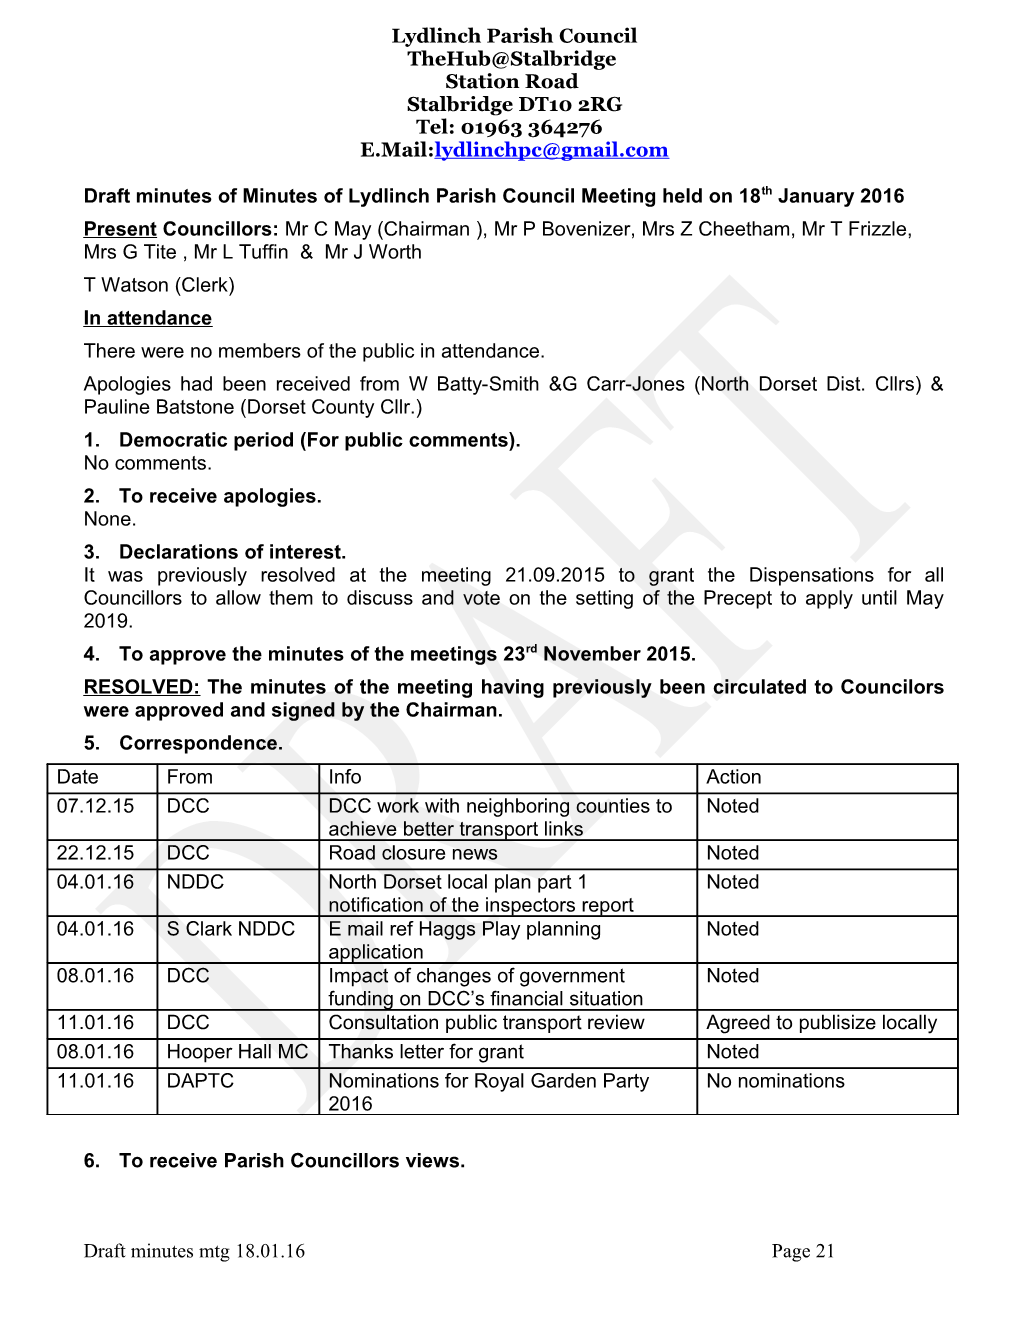 Draft Minutes of Minutes of Lydlinch Parish Council Meeting Held on 18Th January 2016